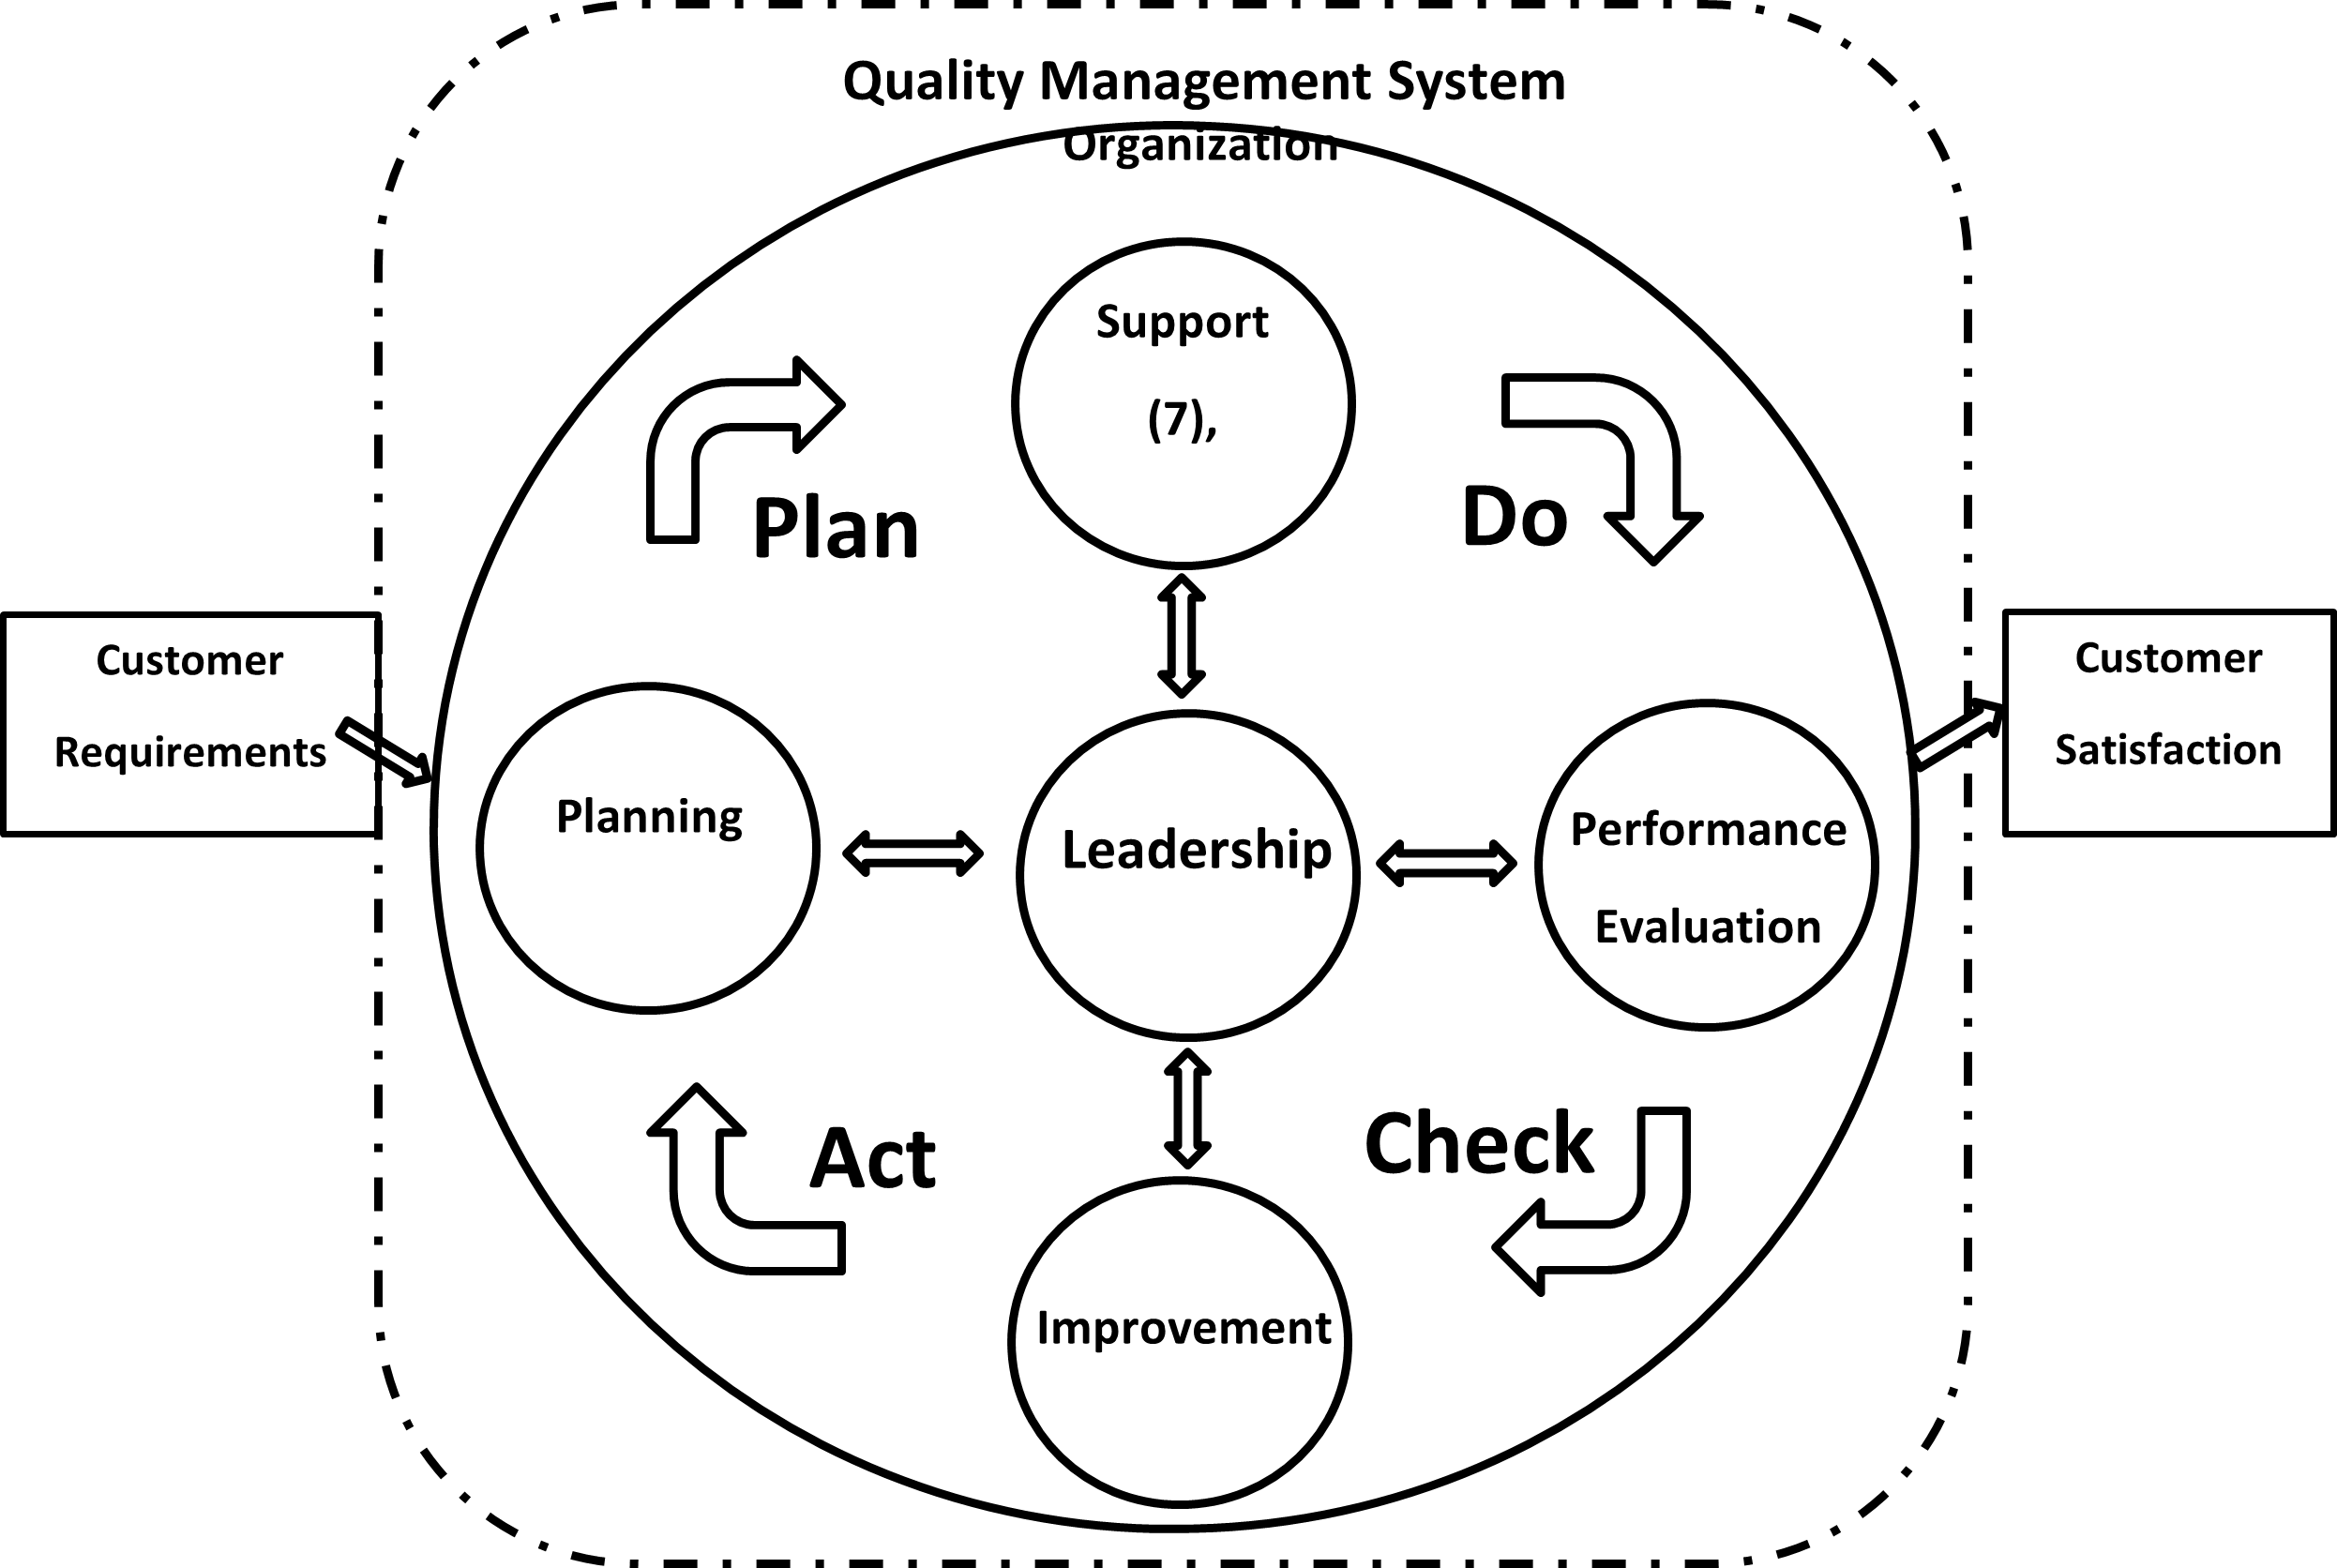 Figure 2: Relationship of the PDCA cycle with the Quality Management System standard.